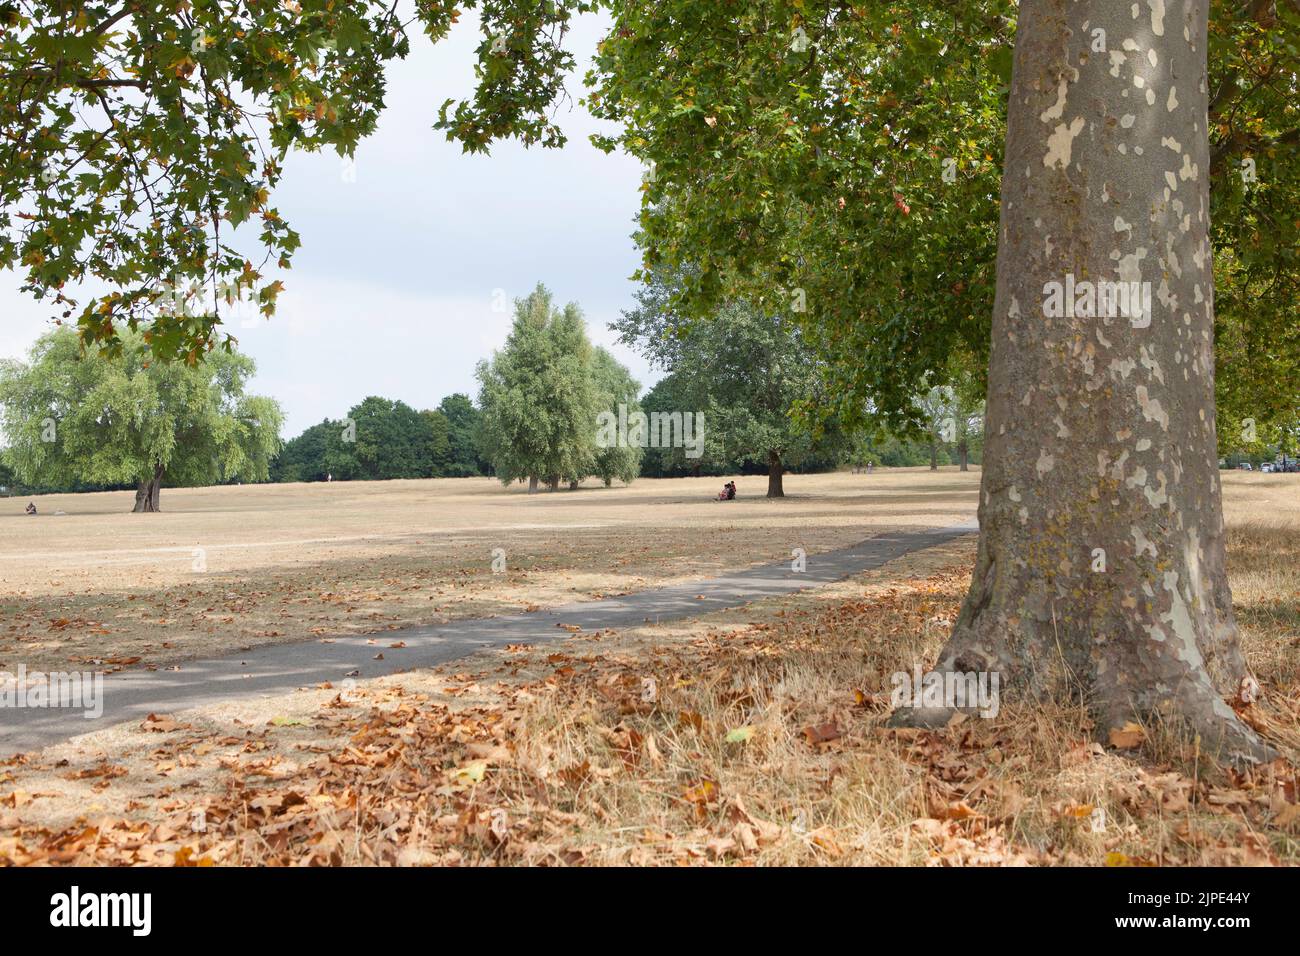 London, UK, 17 August 2022: Streatham Common in South London is entirely brown as all the grass is parched due to the recent drought. Deep-rooted trees are still green but many have dropped some of their leaves to conserve their water supplies. Rain storms crossed the area later that afternoon. Anna Watson/Alamy Live News Stock Photo